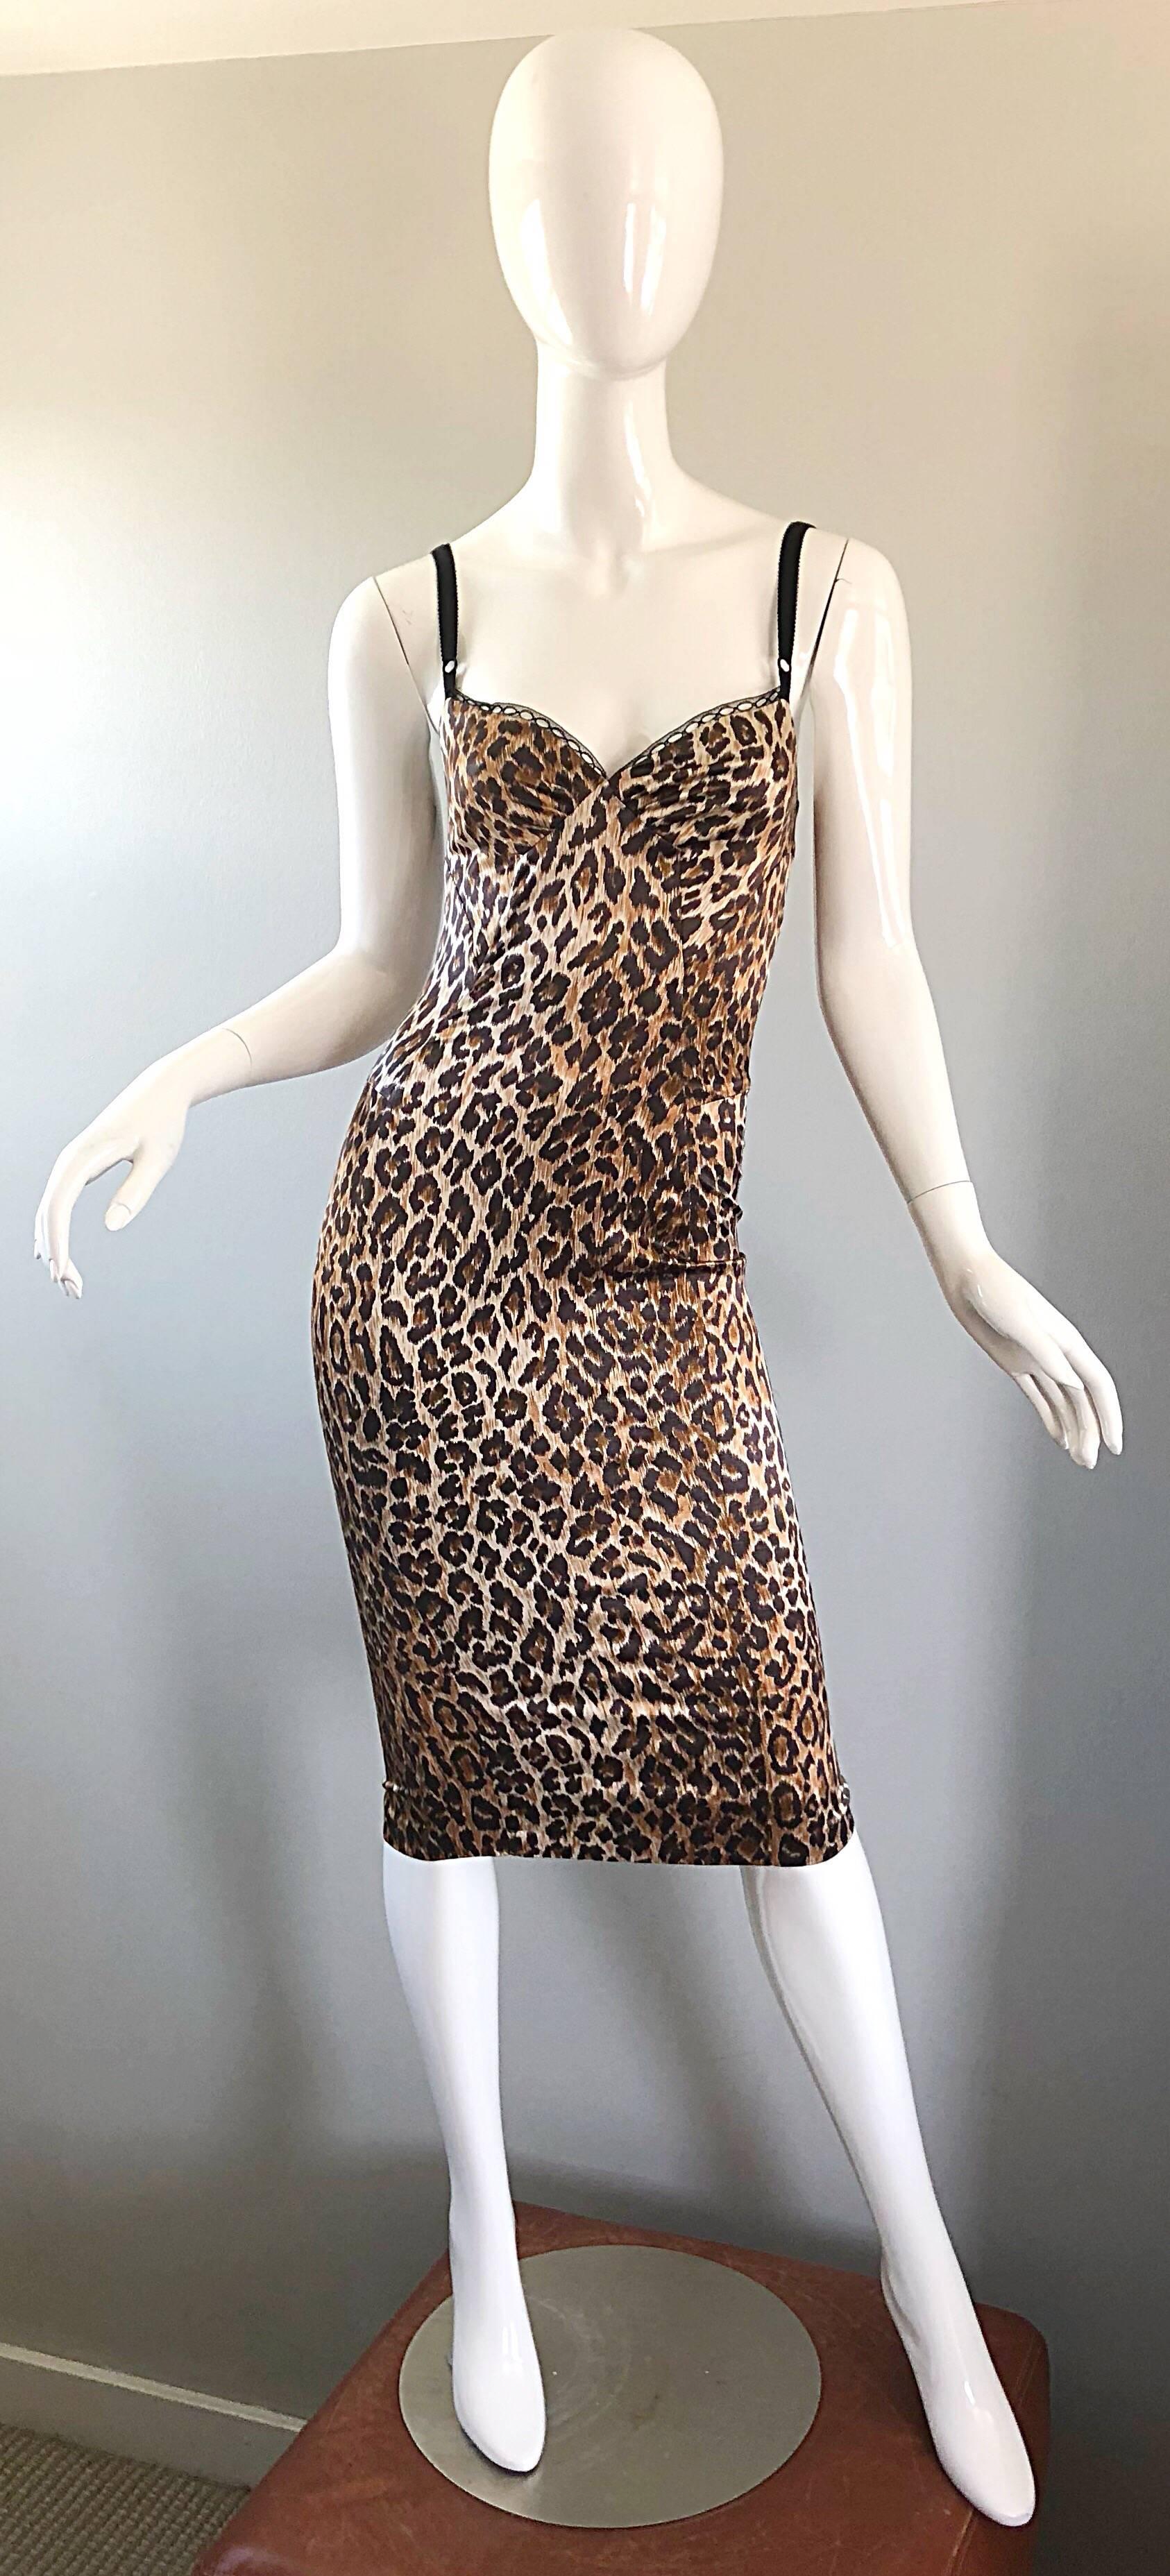 Sexy iconic late 90s DOLCE & GABBANA leopard / cheetah animal print bodycon bustier corset dress! Now, this is a DRESS! Features everything a woman could possibly want in a dress--Super flattering fabric that stretches to fit, and hides any